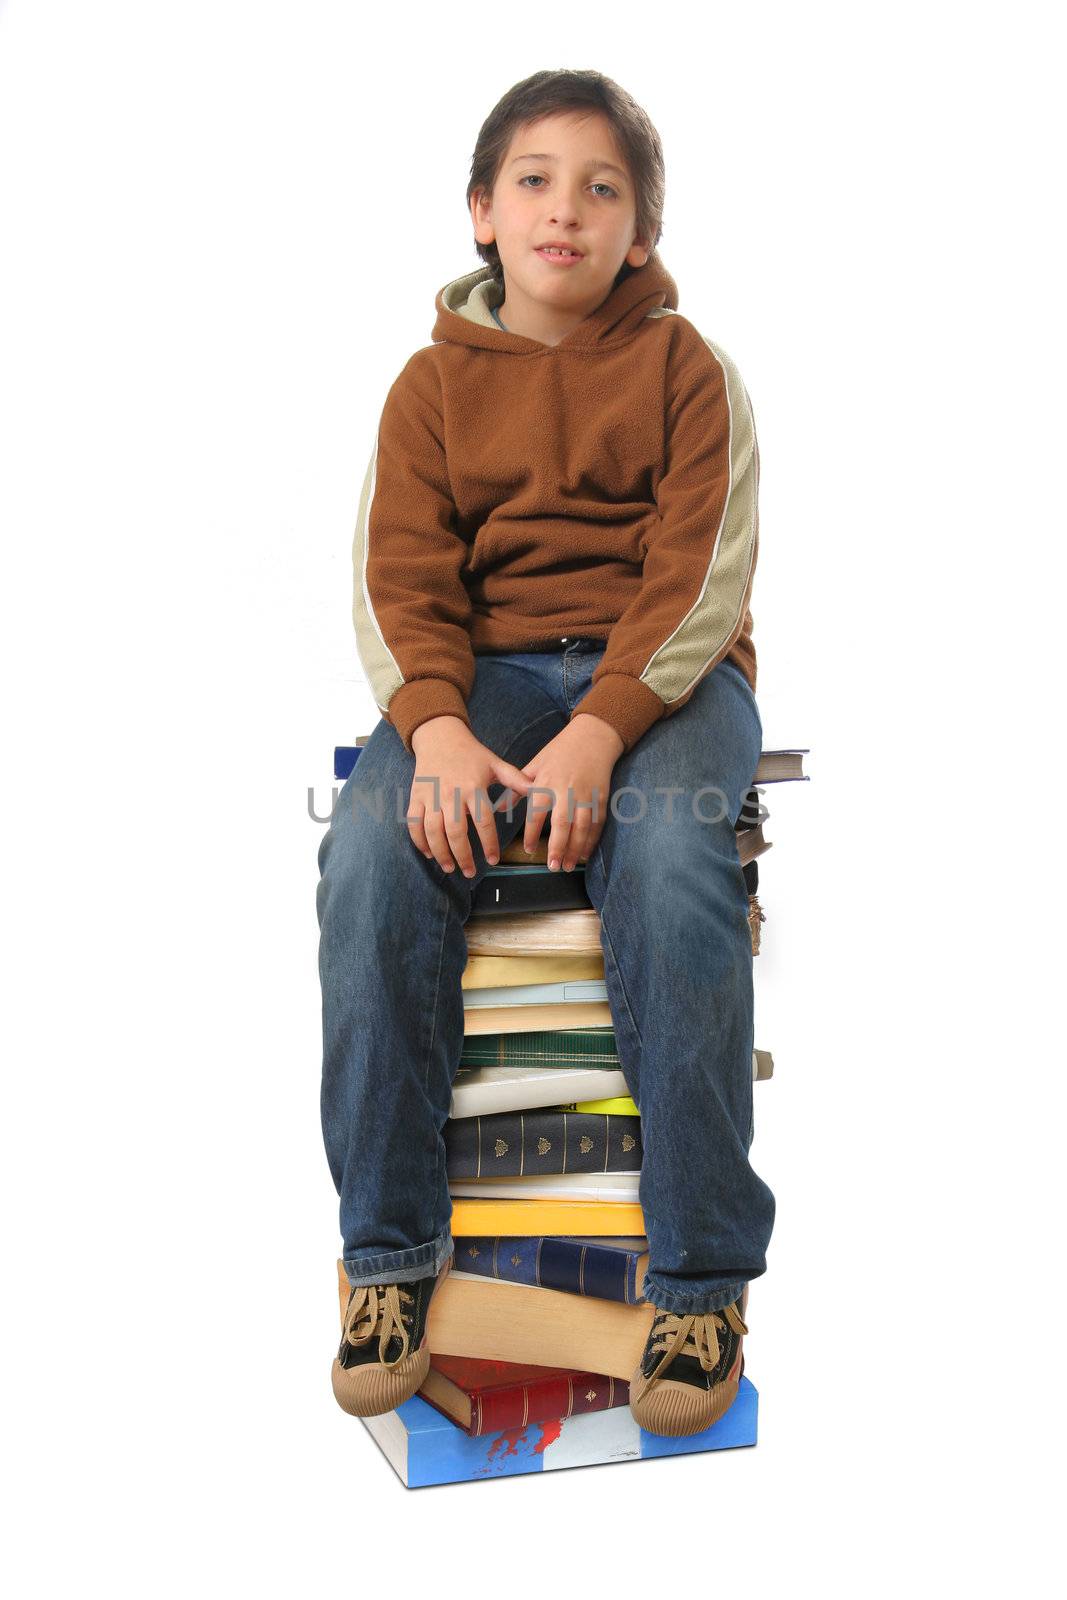 Boy sitting on a big pile of books. Different expressions (series)  